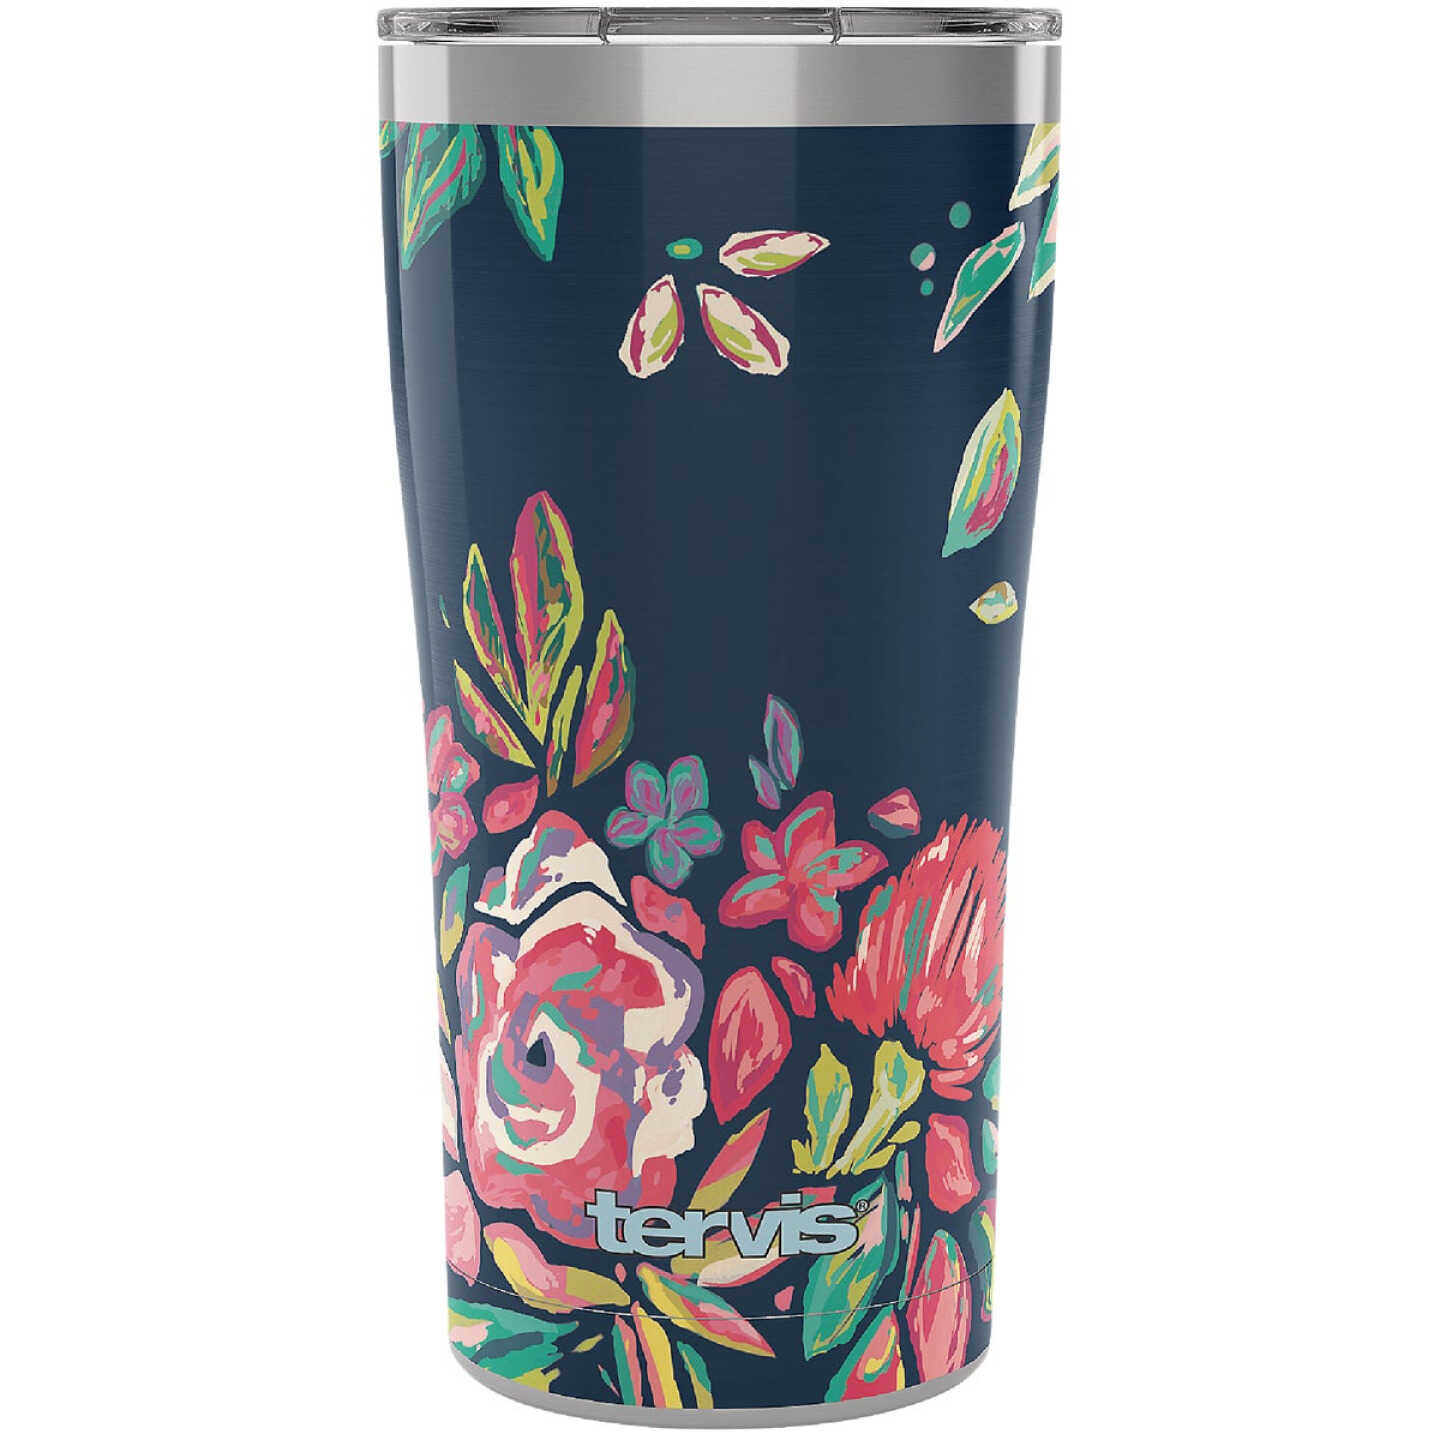 Tervis Mandalorian - The Child Sipping Tumbler, 16 oz